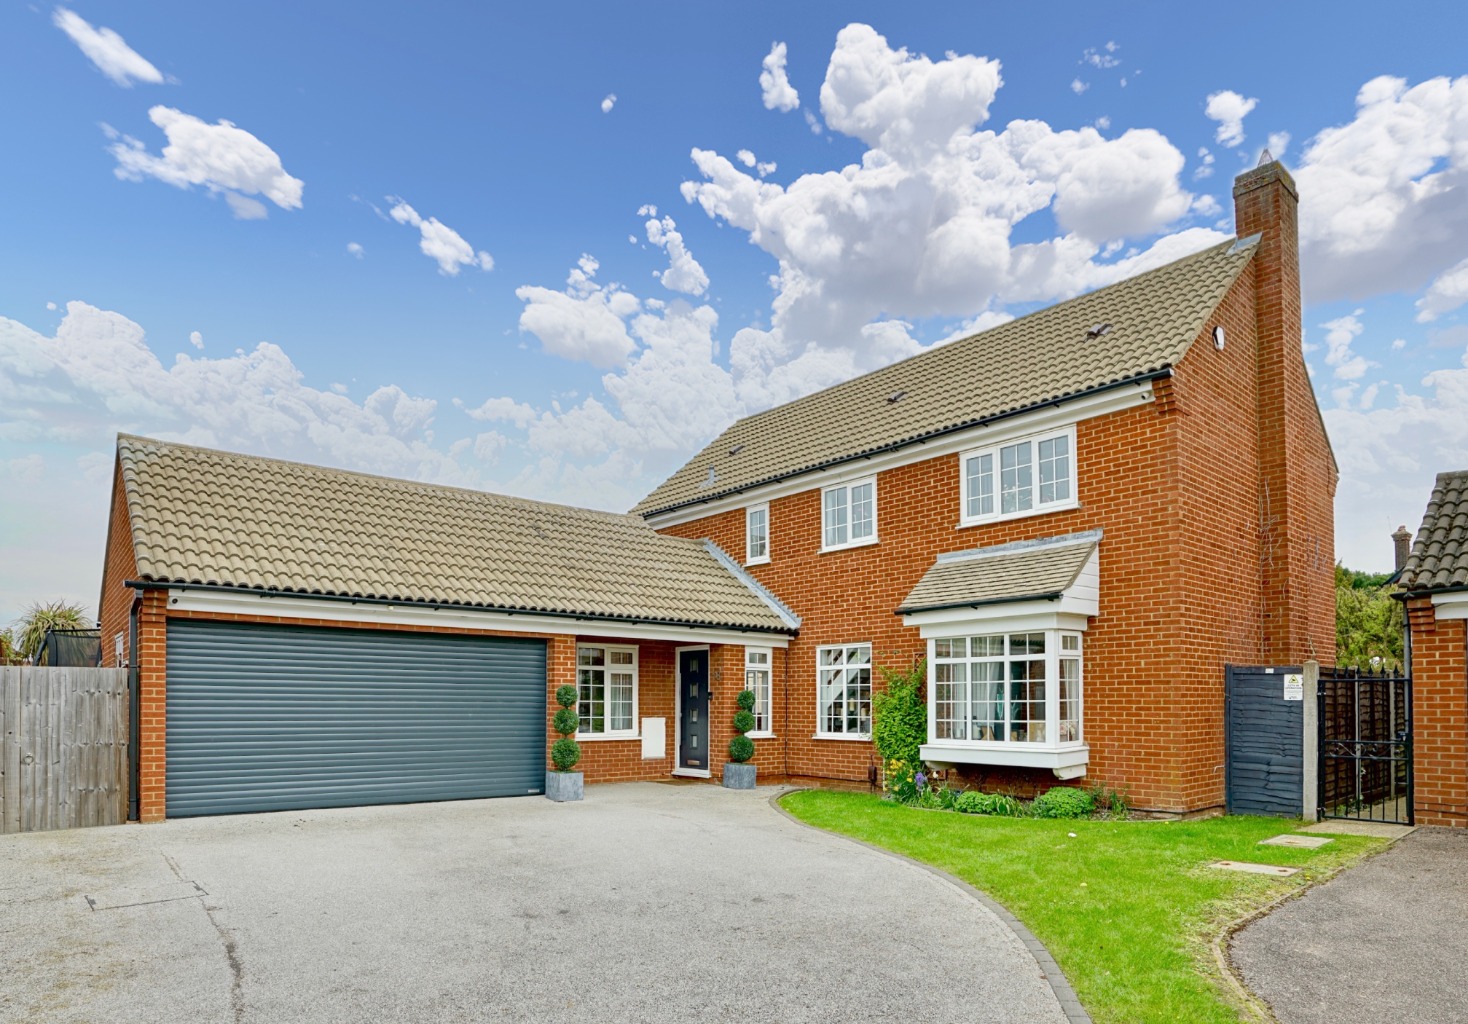 4 bed detached house for sale in Valerian Close, St. Neots - Property Image 1